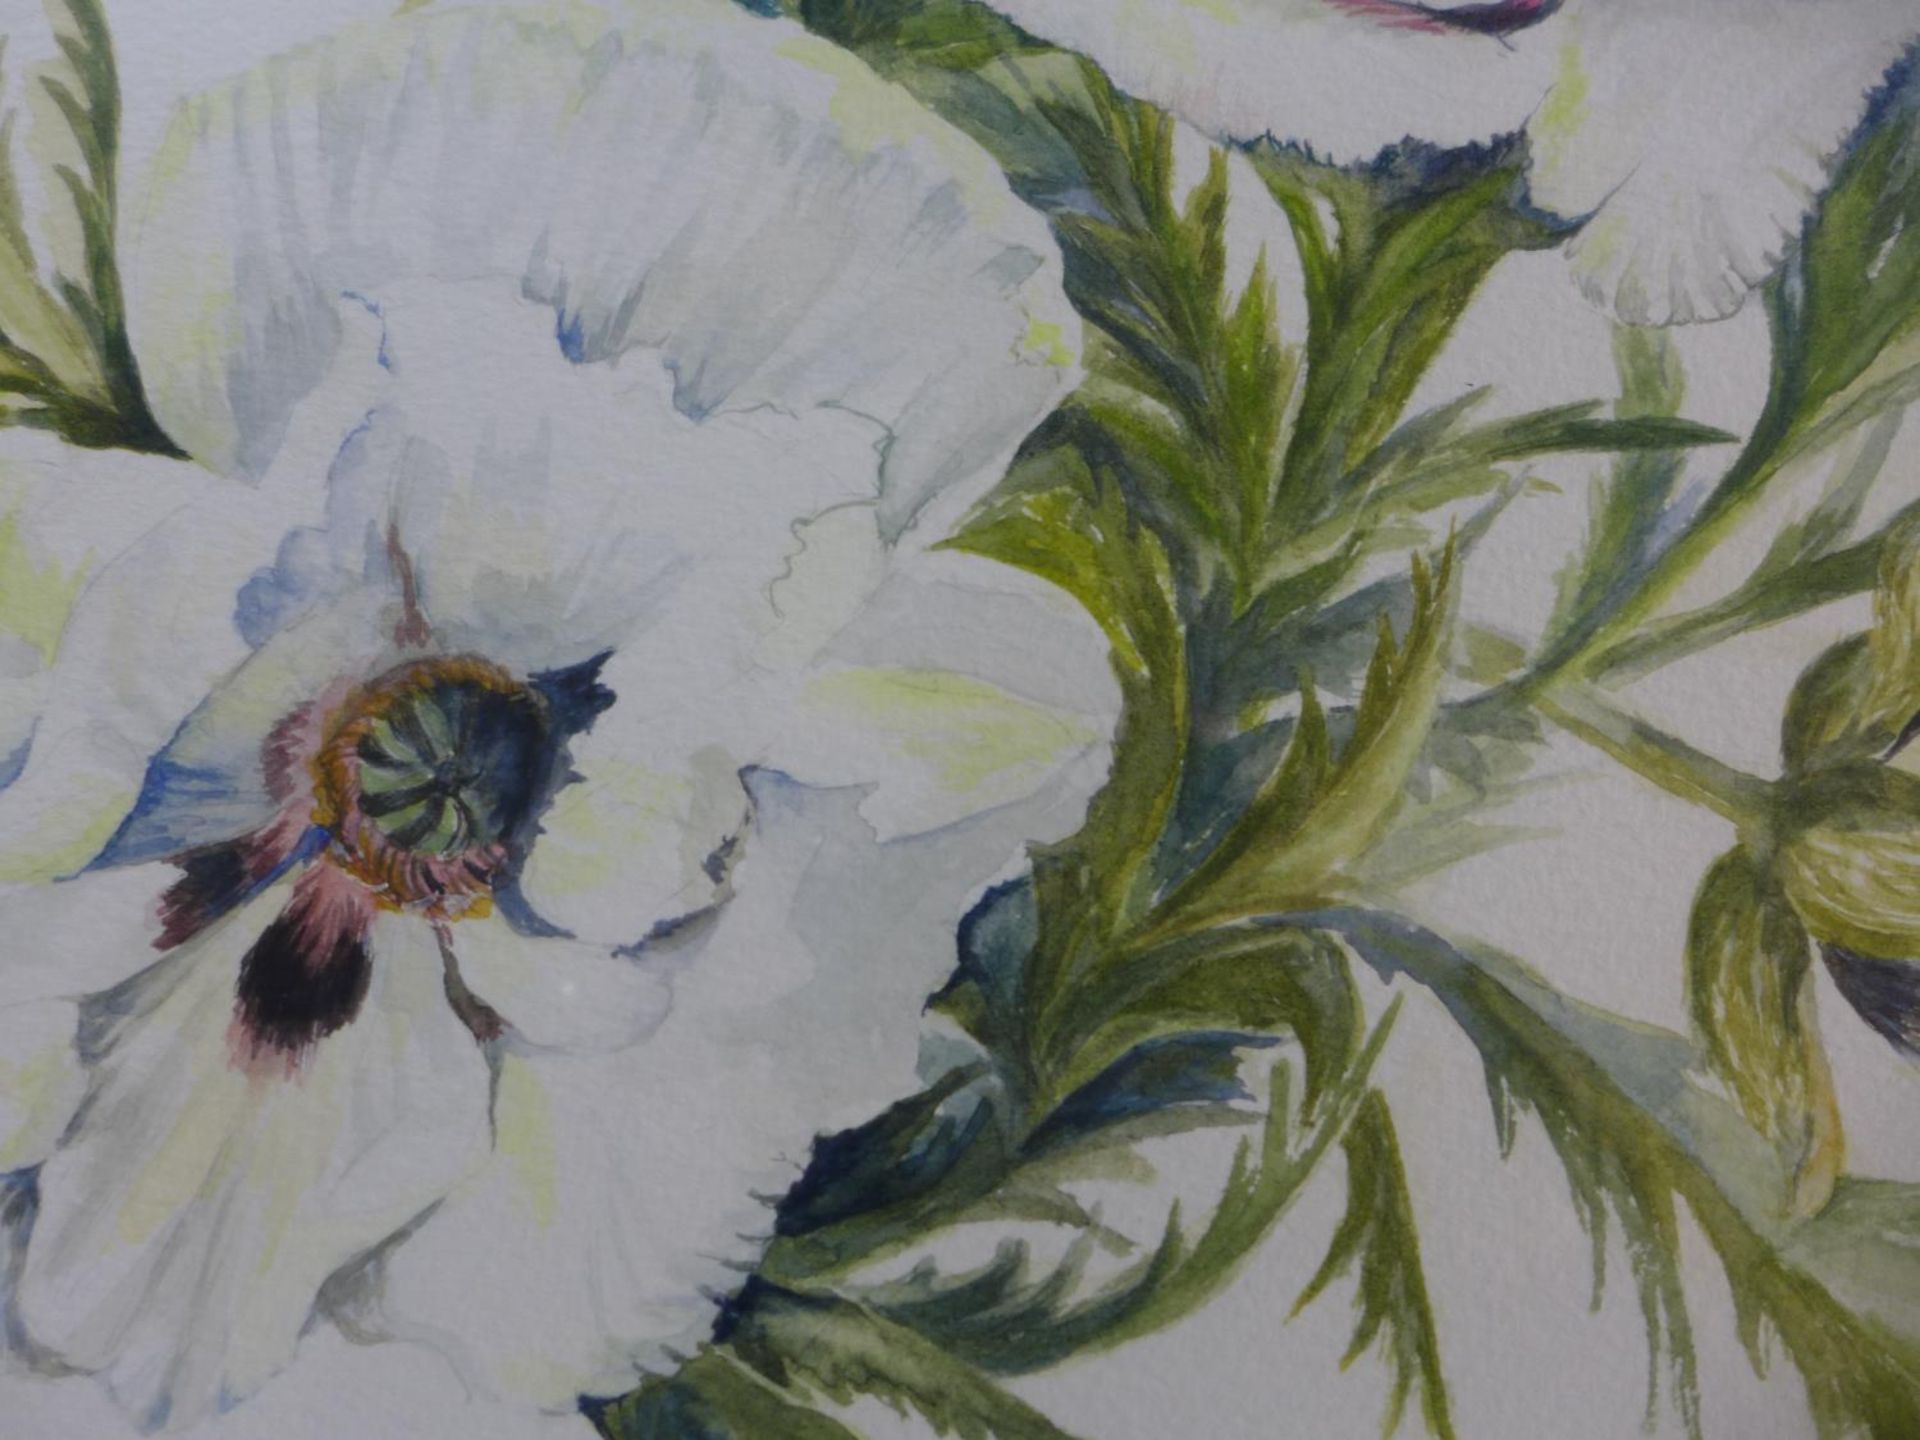 LIZ PELLING (BRITISH 20TH CENTURY) 'WHITE ORIENTAL POPPY', WATERCOLOUR, SIGNED LOWER RIGHT, LABEL - Image 3 of 5